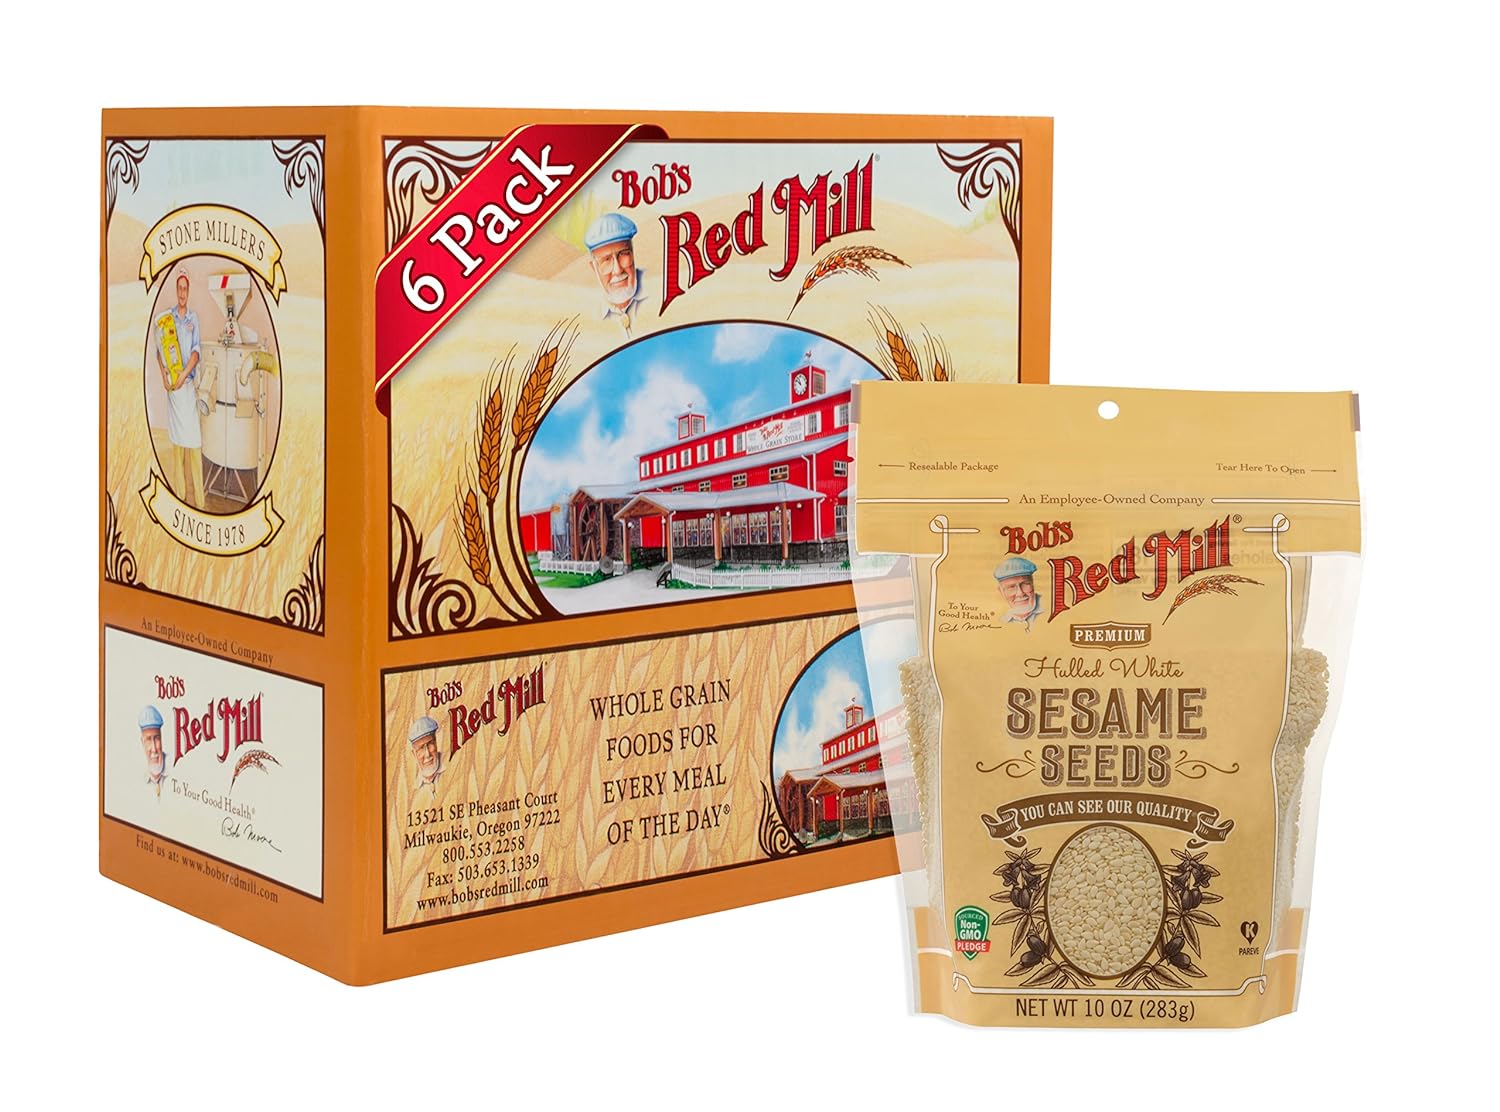 Bob's Red Mill Resealable Hulled White Sesame Seeds, 10 Ounce (Pack of 6)